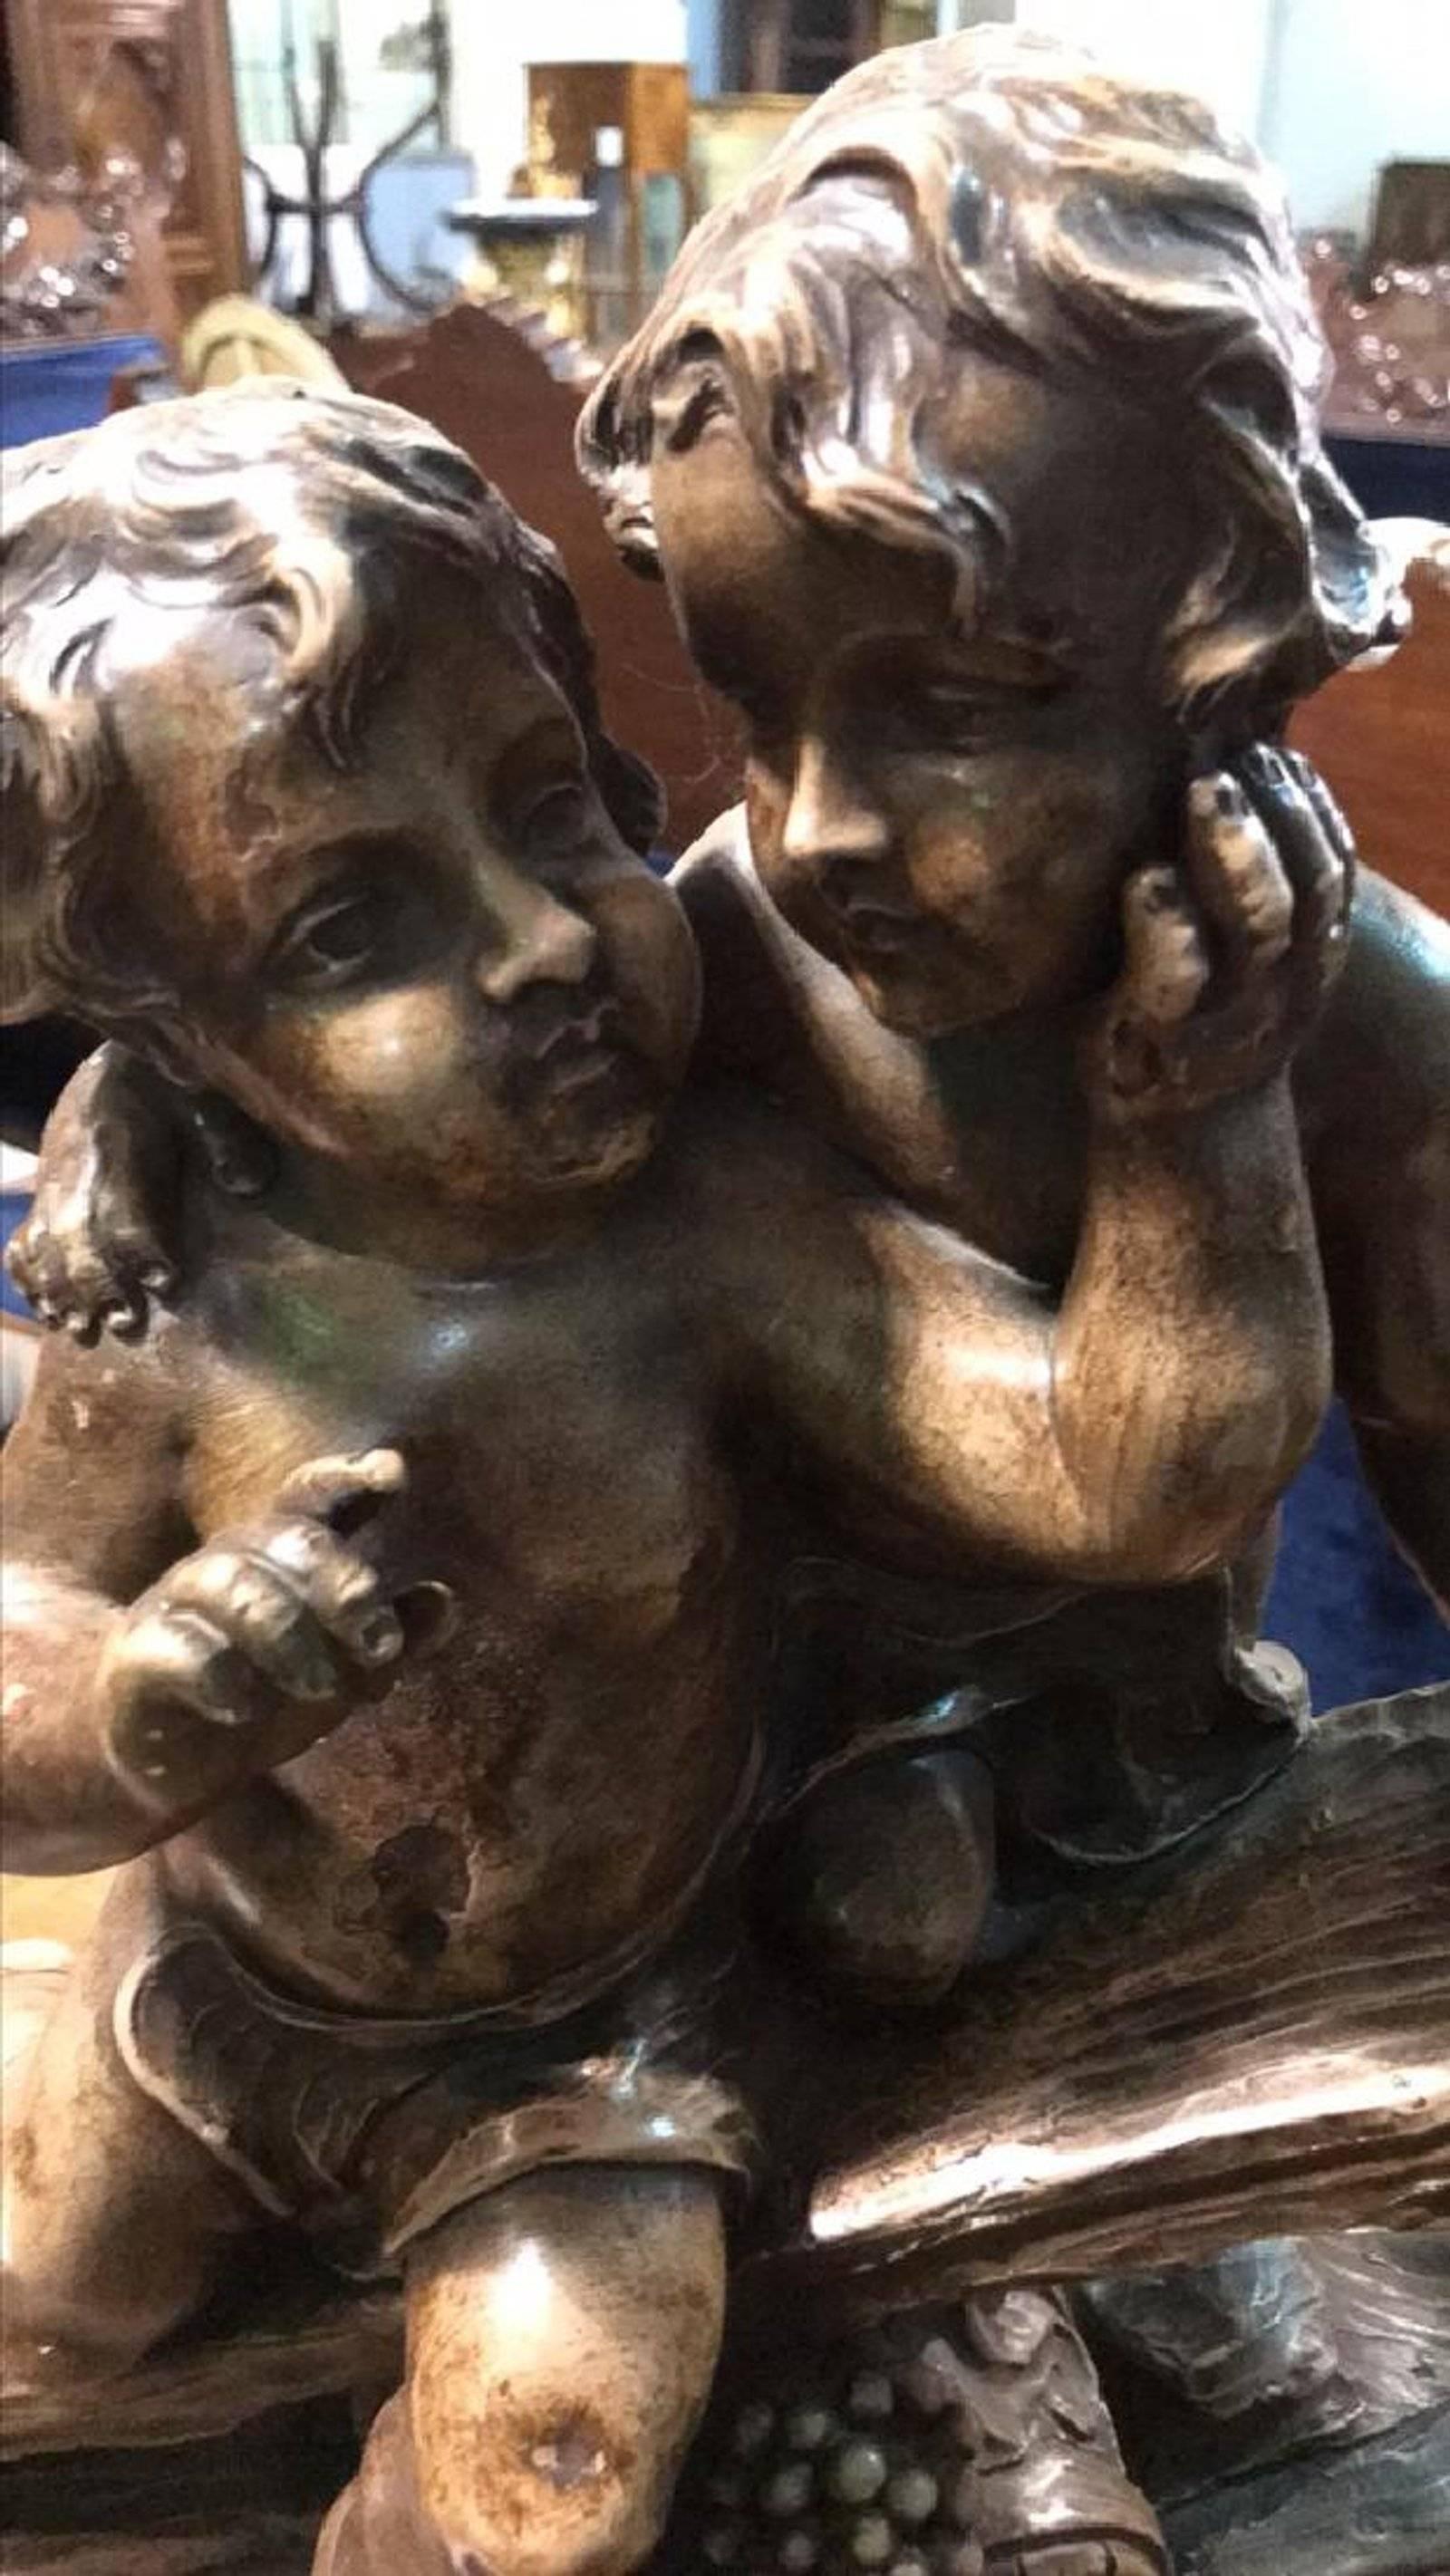 Superb antique French terracotta grouping of two playful cherubs atop driftwood with grape barrel and clusters, signed Balestru.

Wonderful gold brown patina. Exceptional detail.

No damage, restorations or repairs.